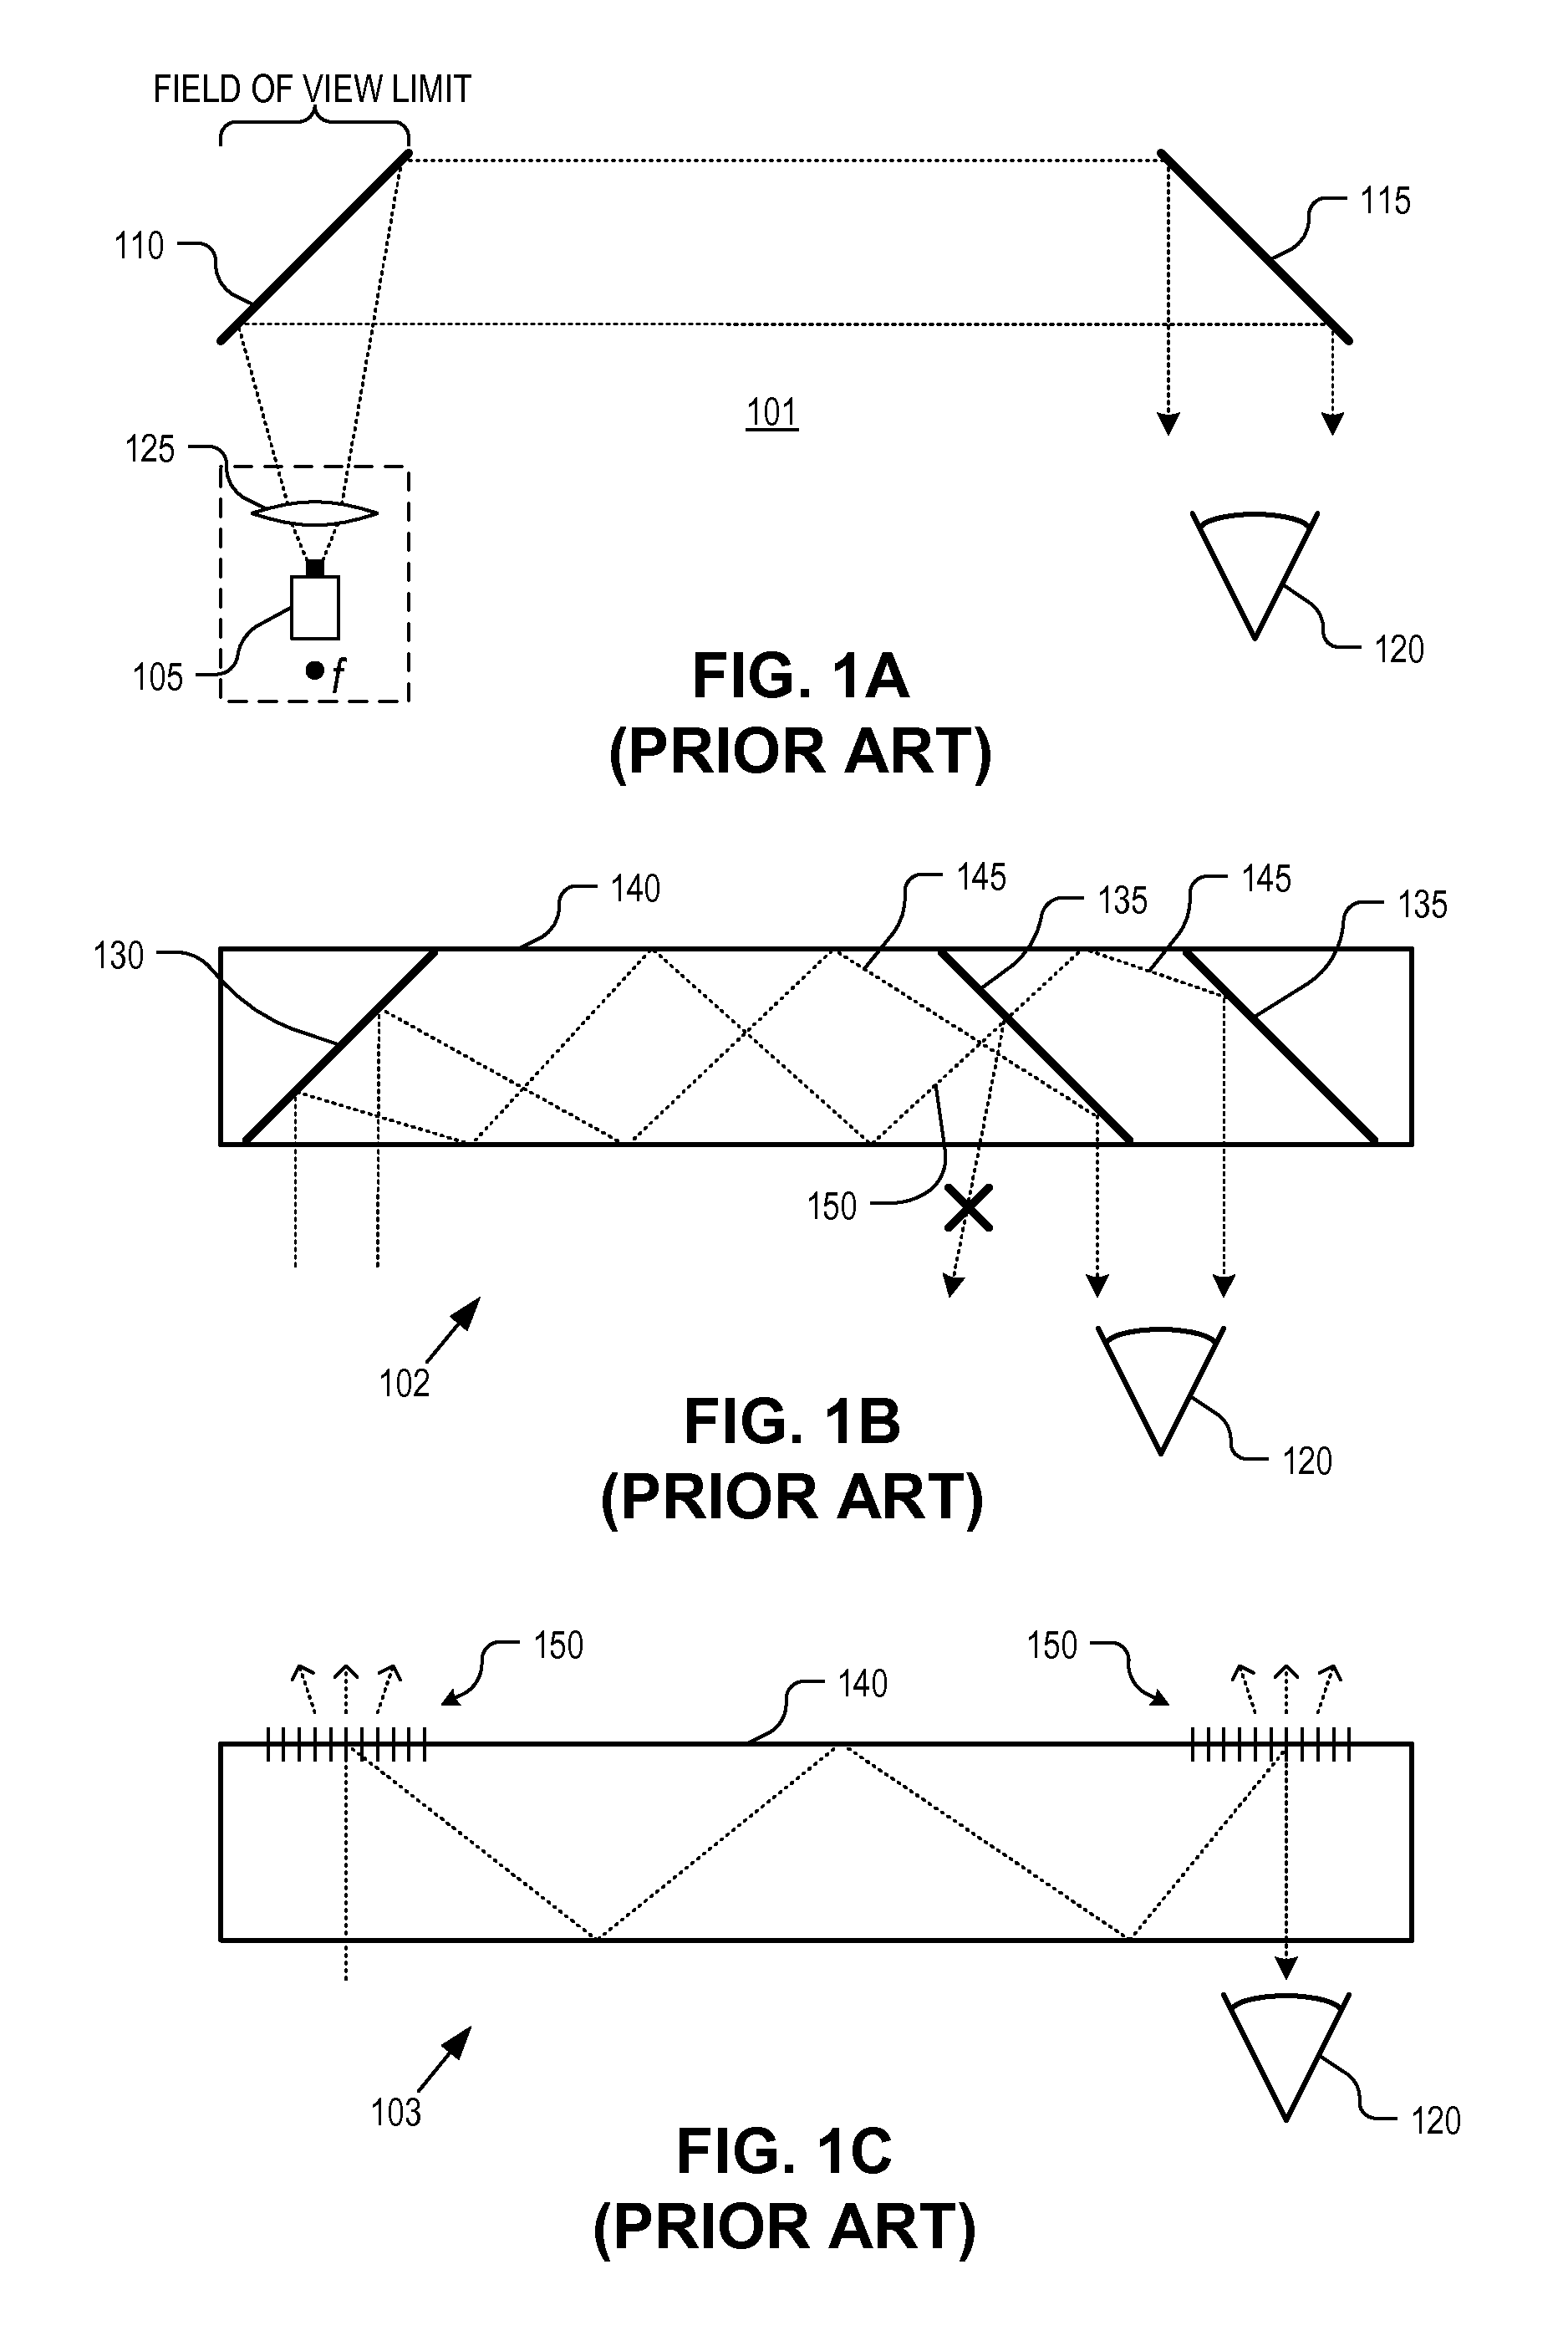 Image waveguide with mirror arrays